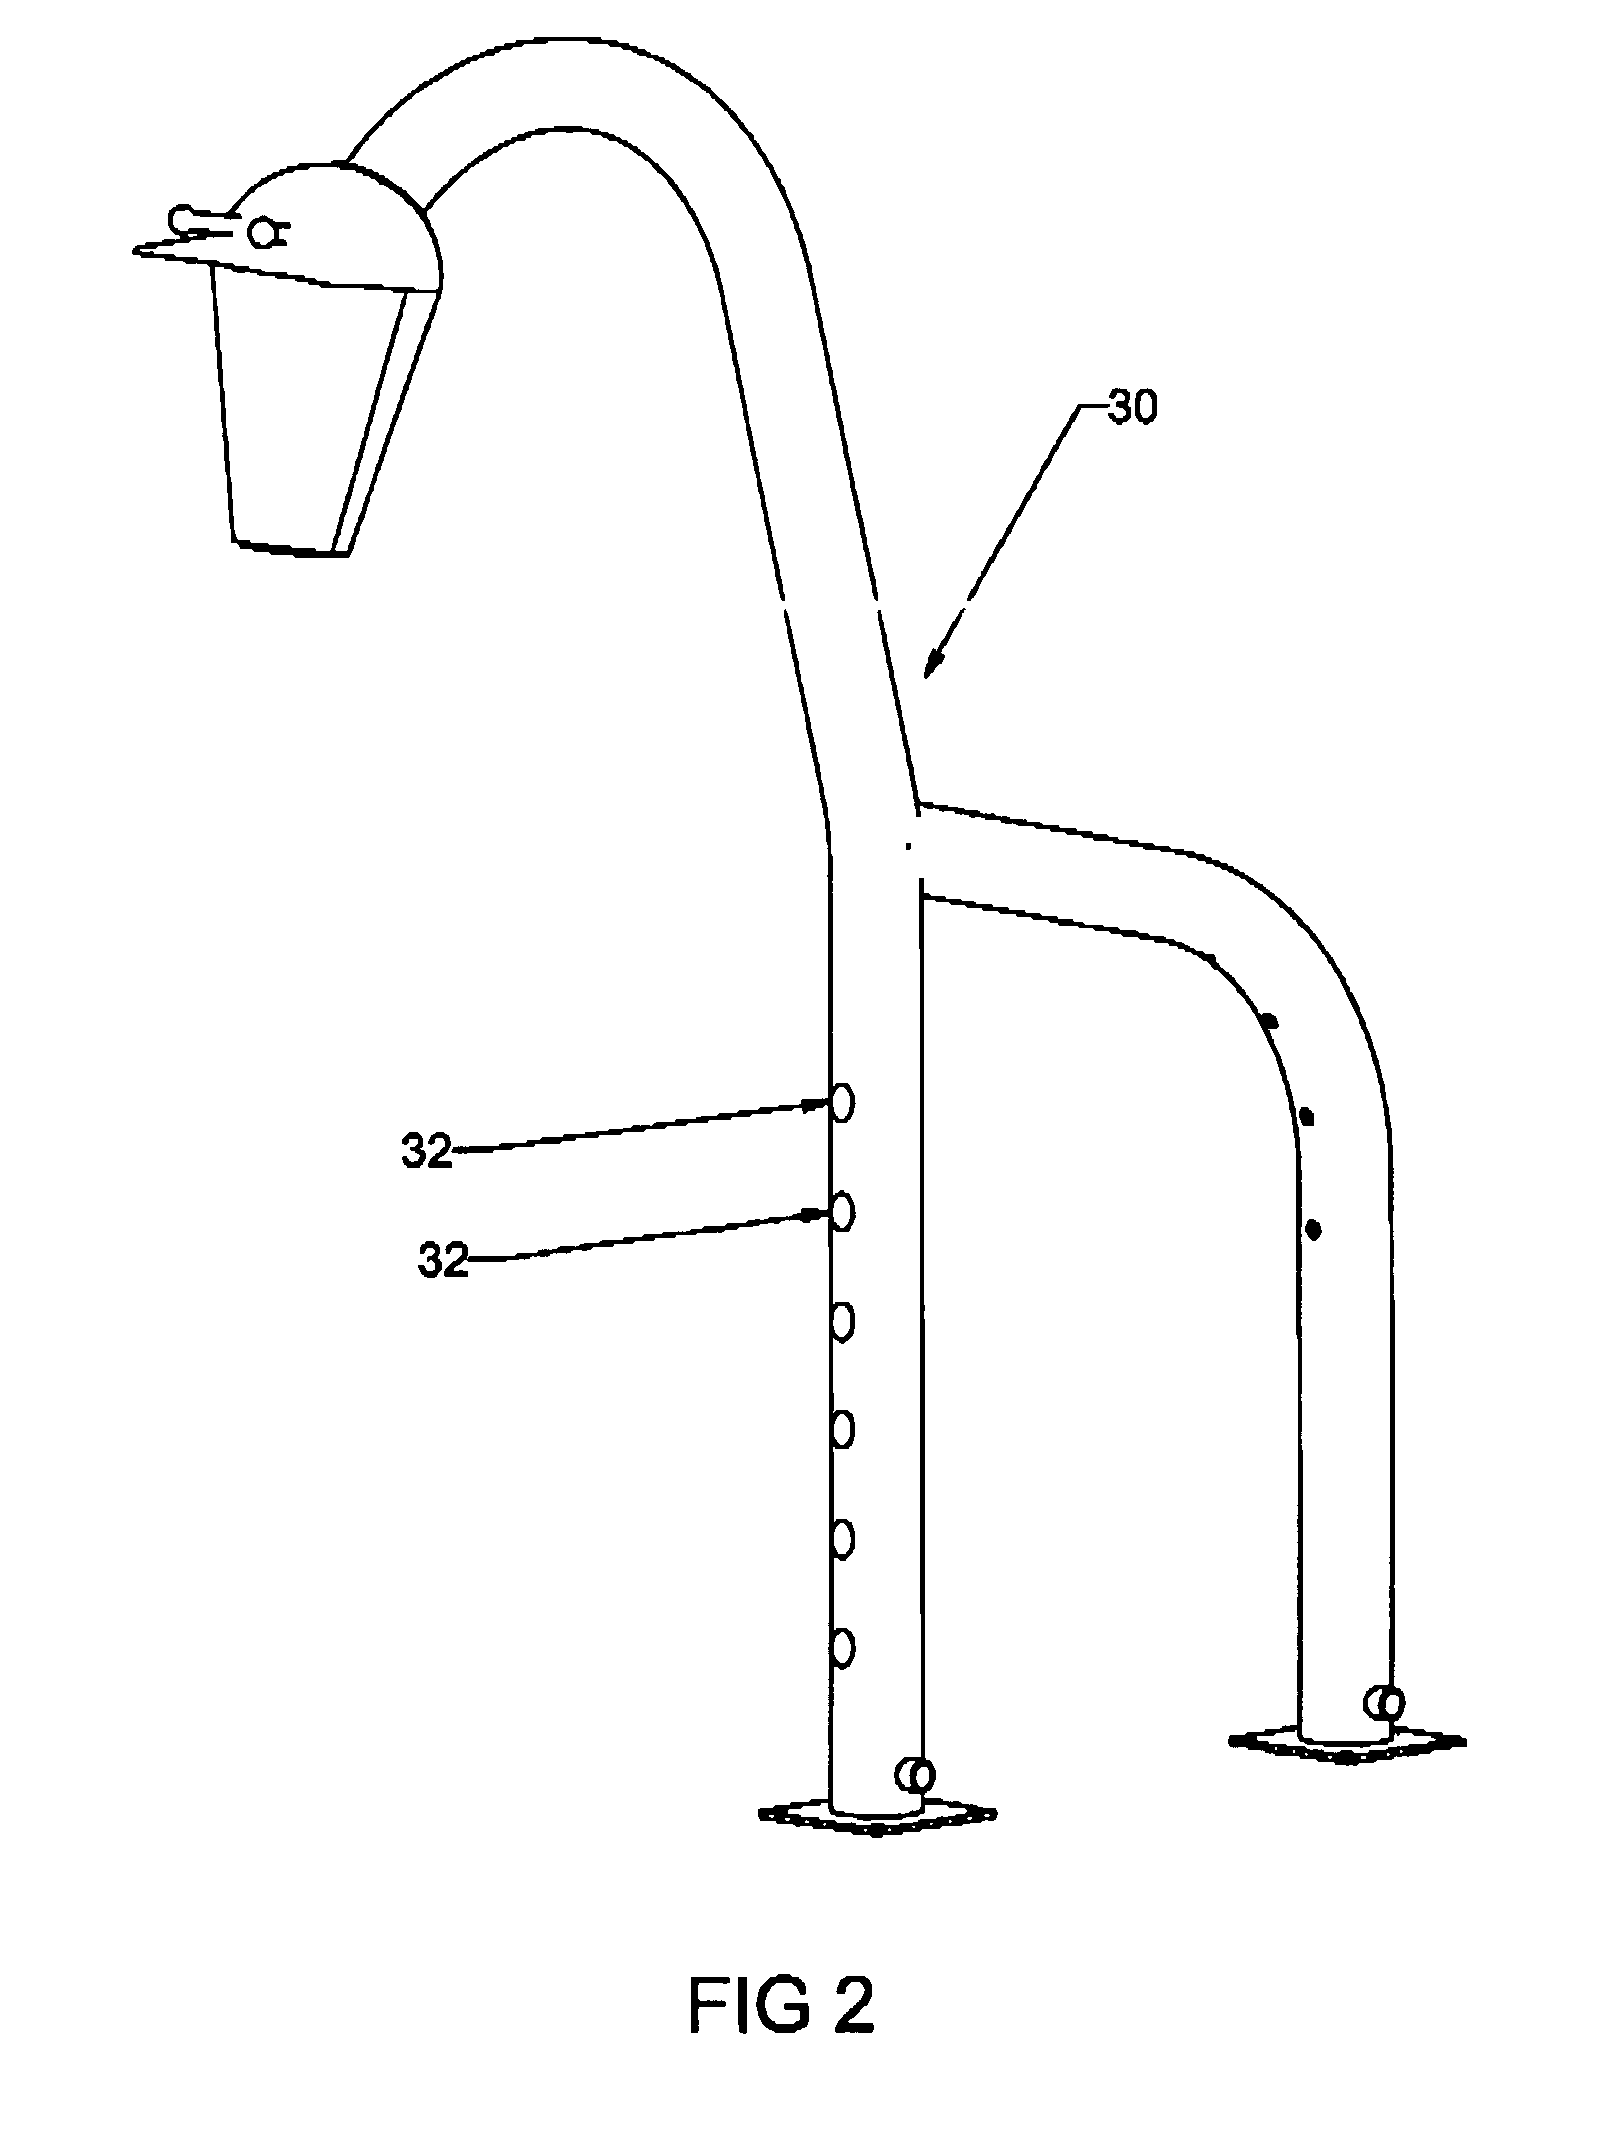 Water flow control system and apparatus